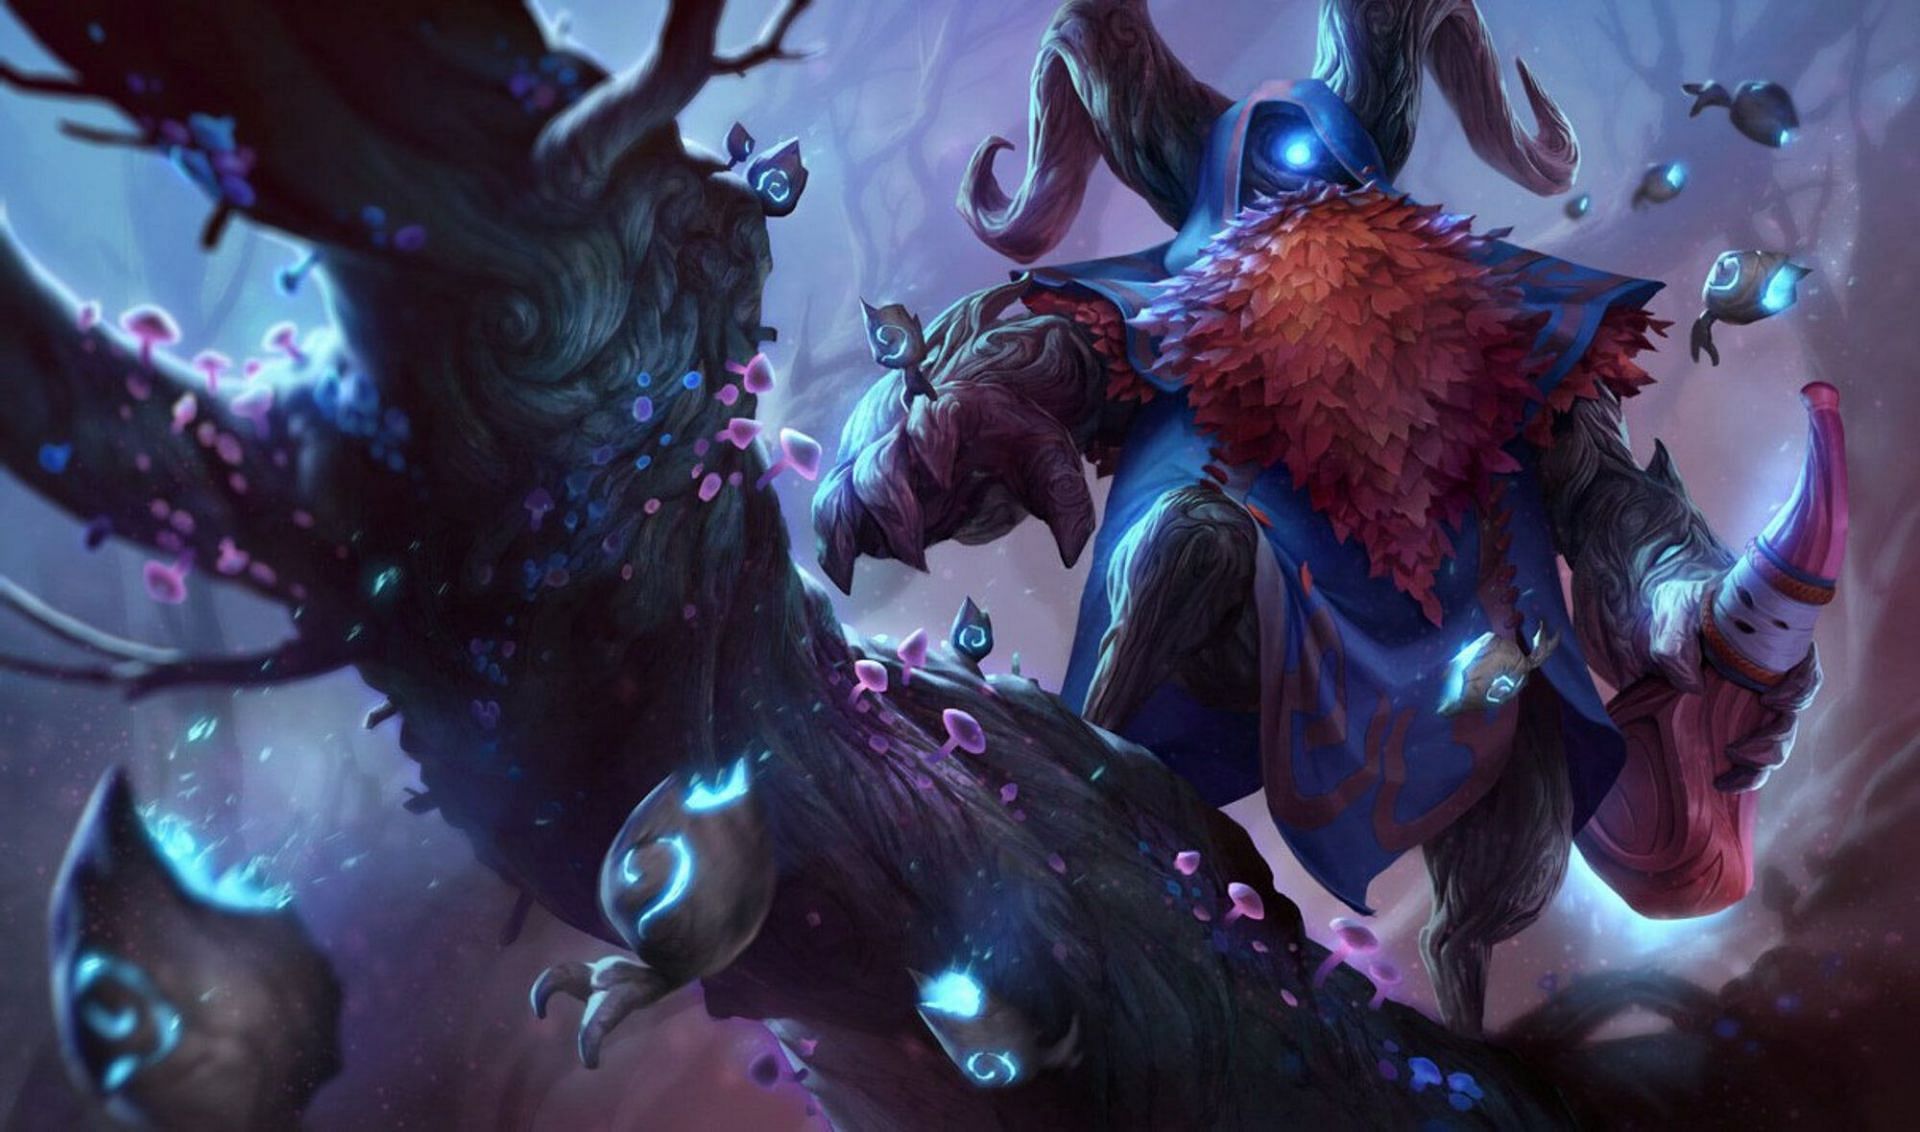 Top 5 strongest League of Legends champions according to Runeterra lore